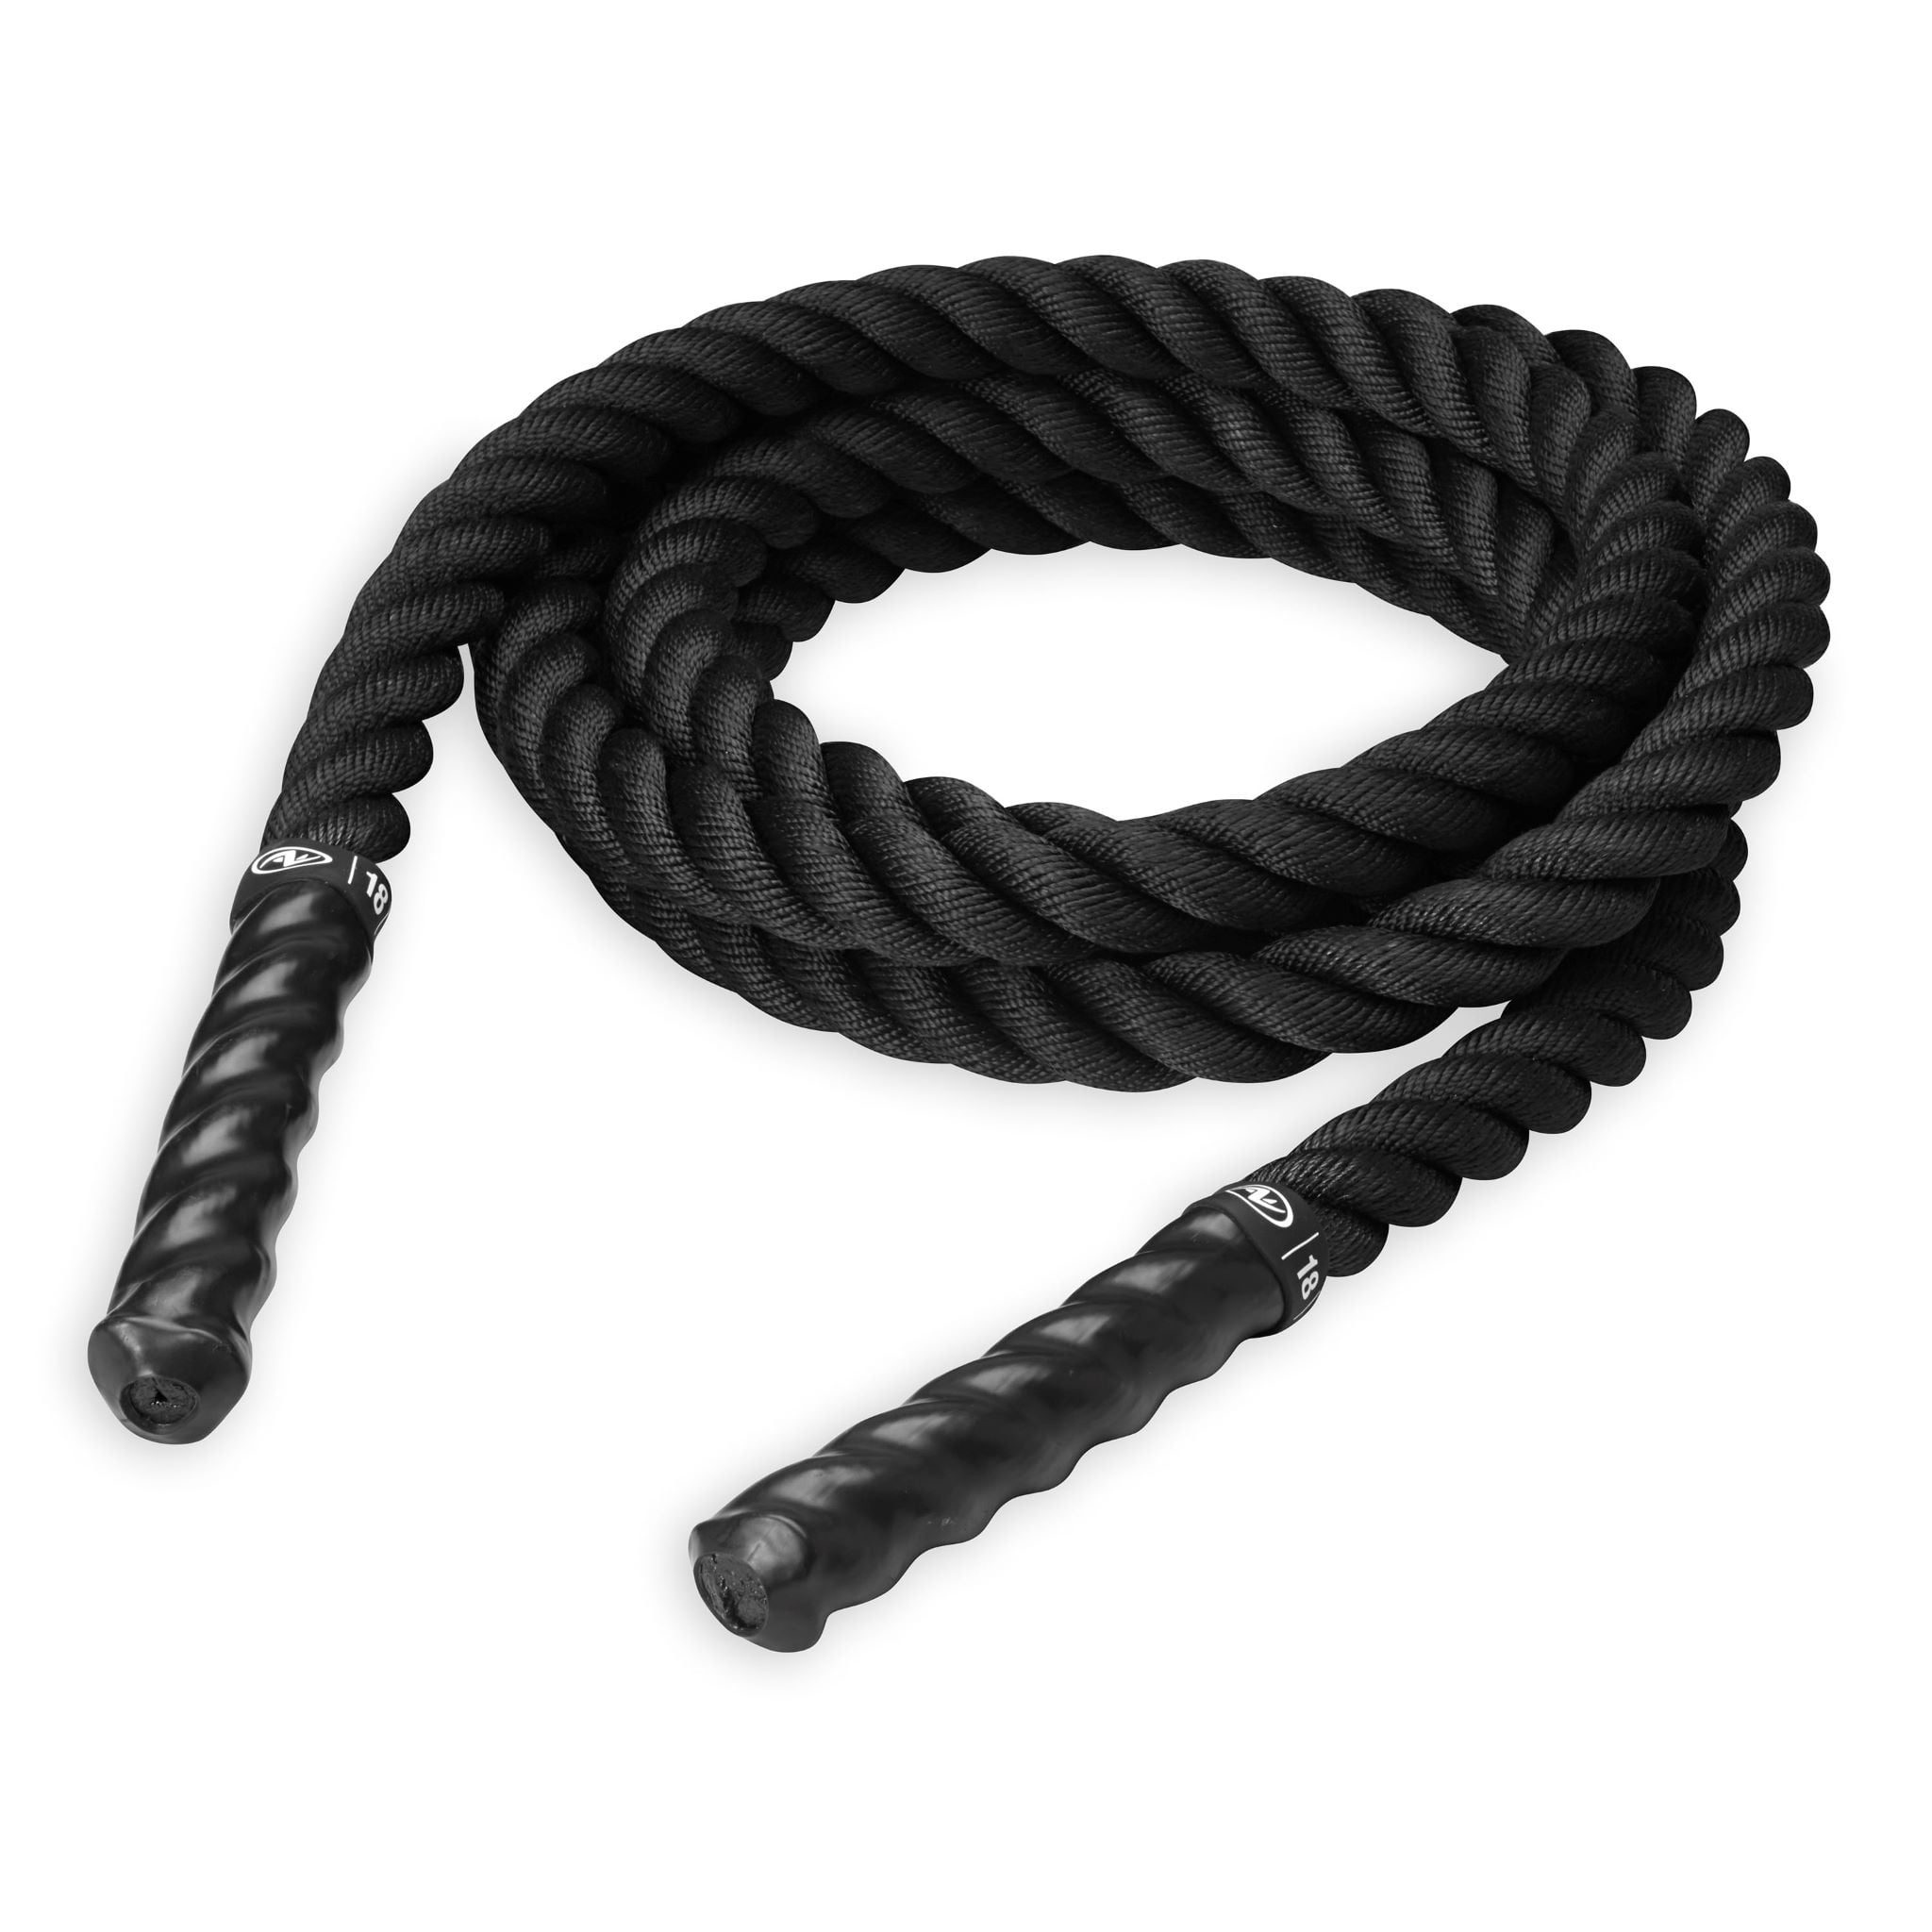 Athletic Works Conditioning Rope, 18 Feet, Black, 10 Pounds